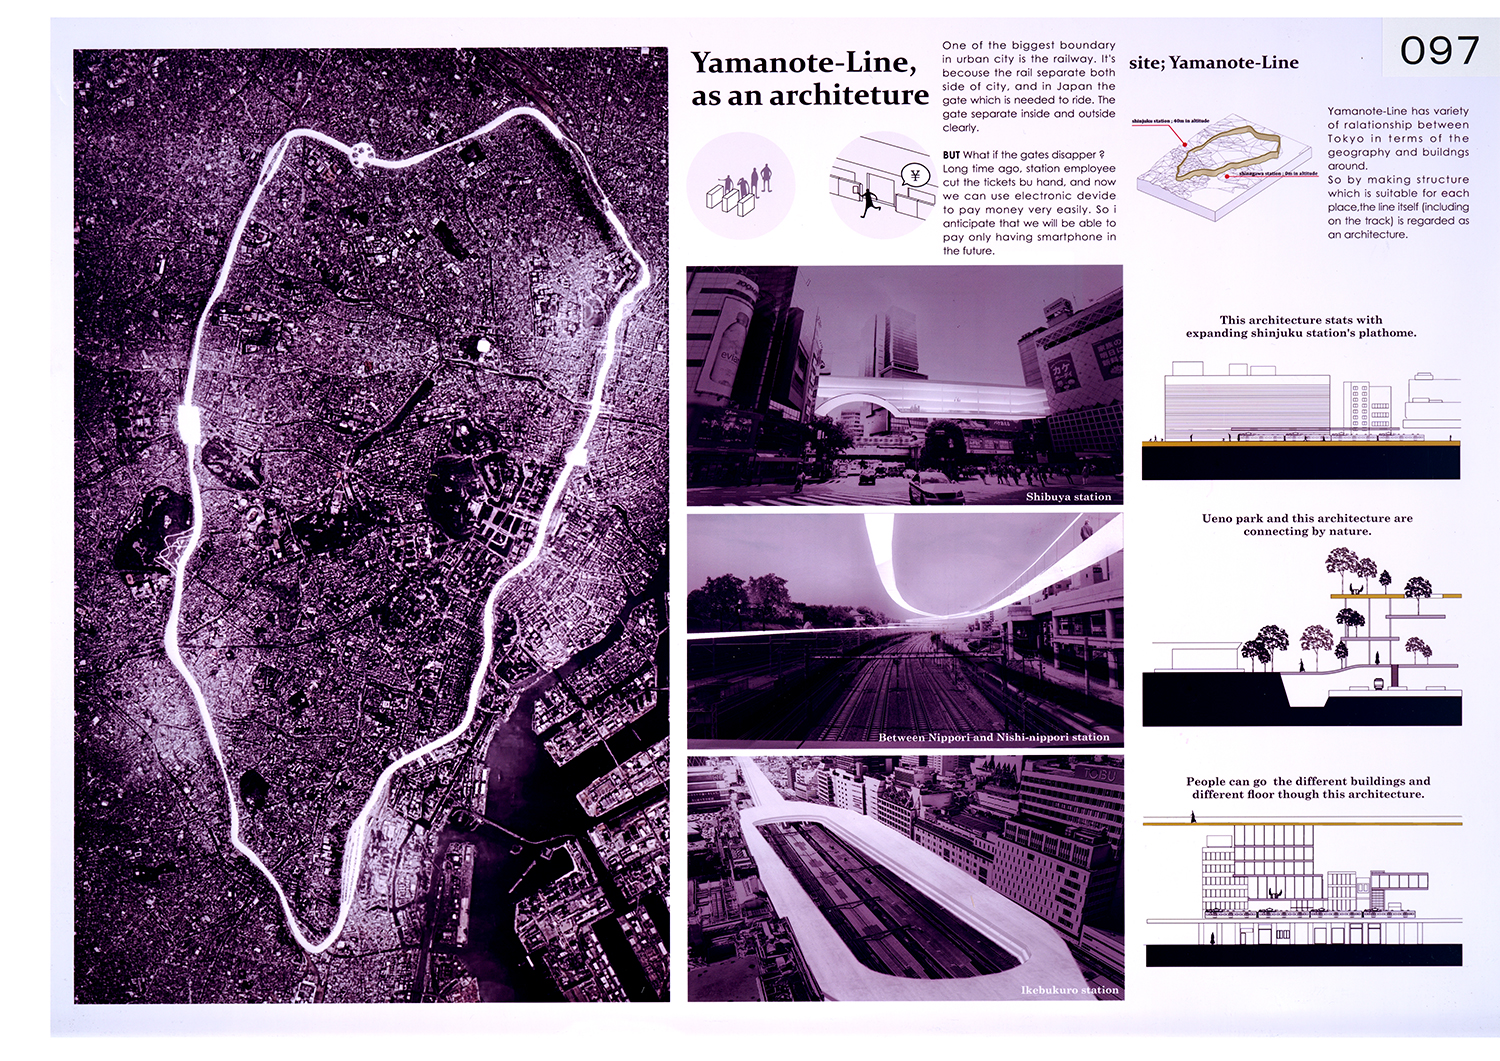 Yamanote-Line, as an architecture